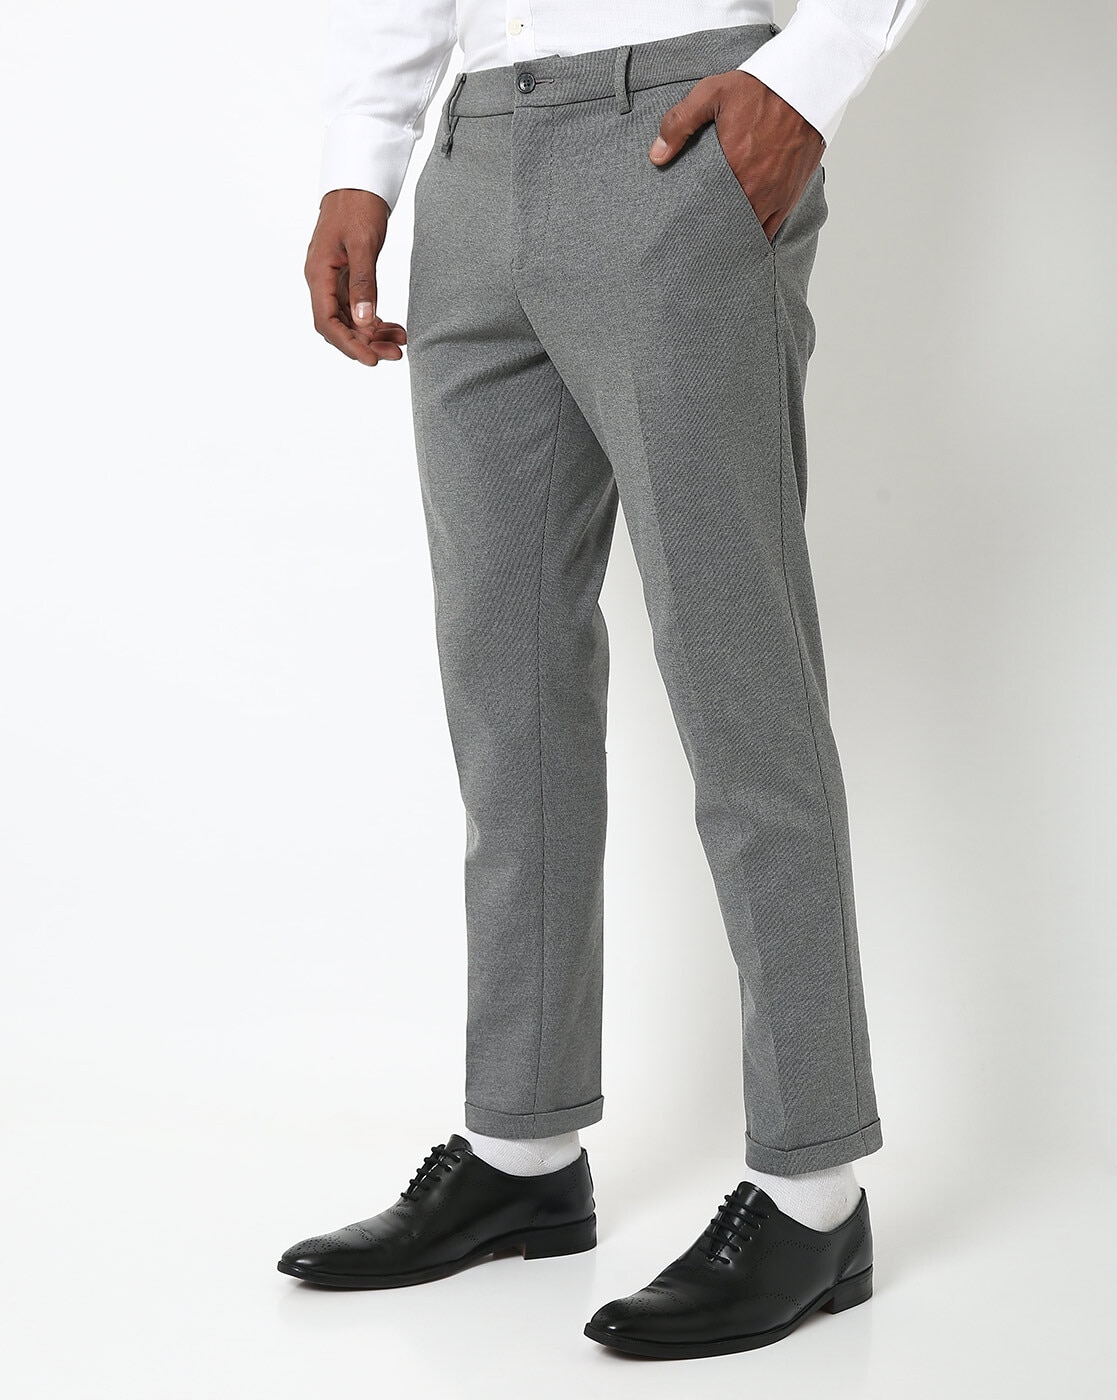 Cashmere knit trousers (241M22704859G) for Man | Brunello Cucinelli